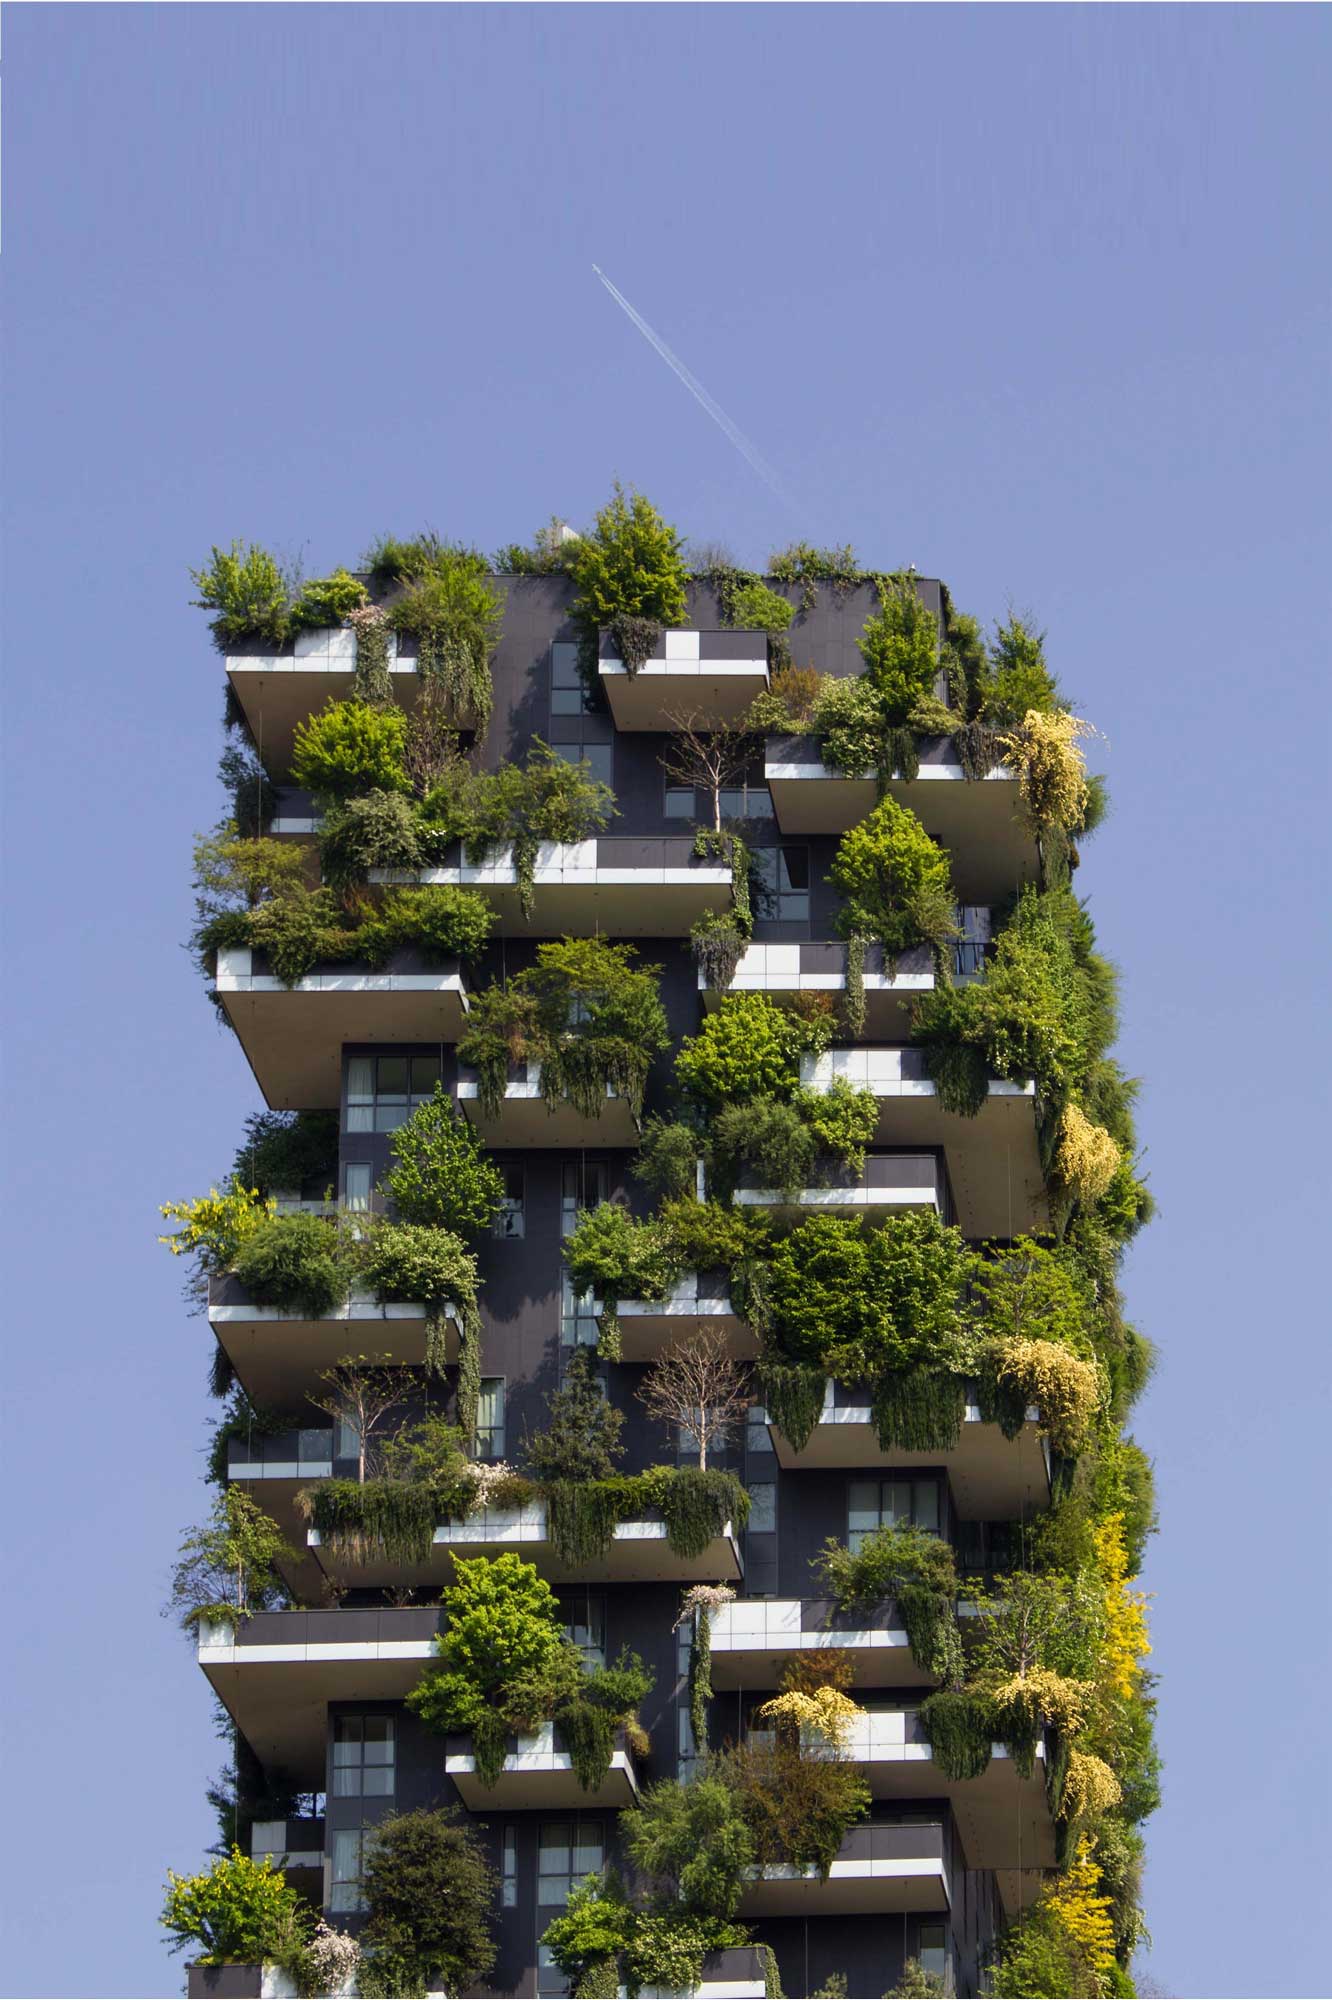 A skyscraper top ten floors on the sky background. The building embeds growing at each floor green trees and bushes